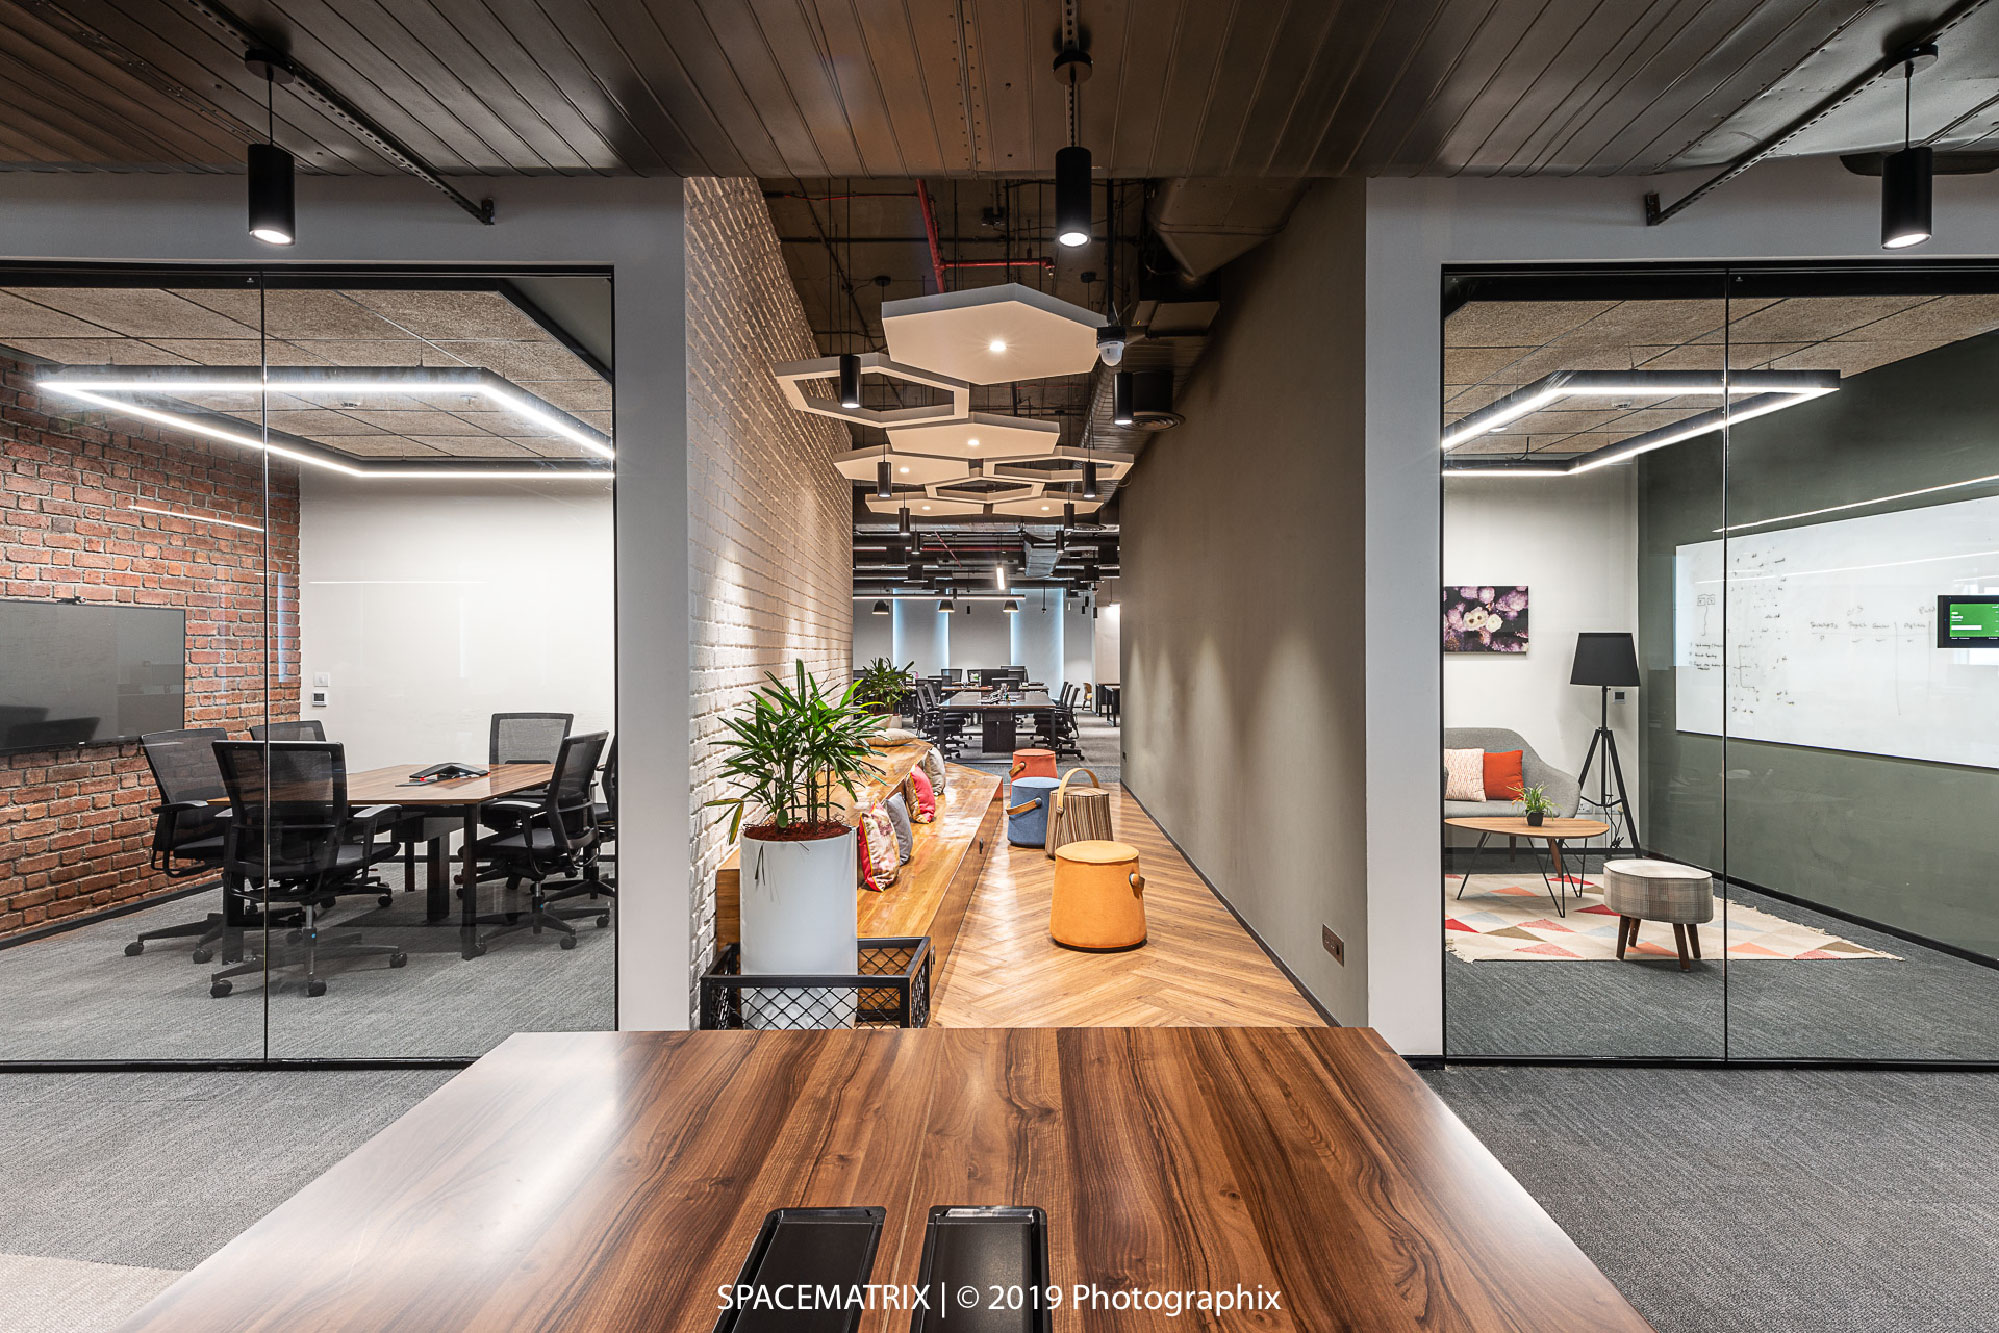 Anglo American workplace: Correlation between office design and culture